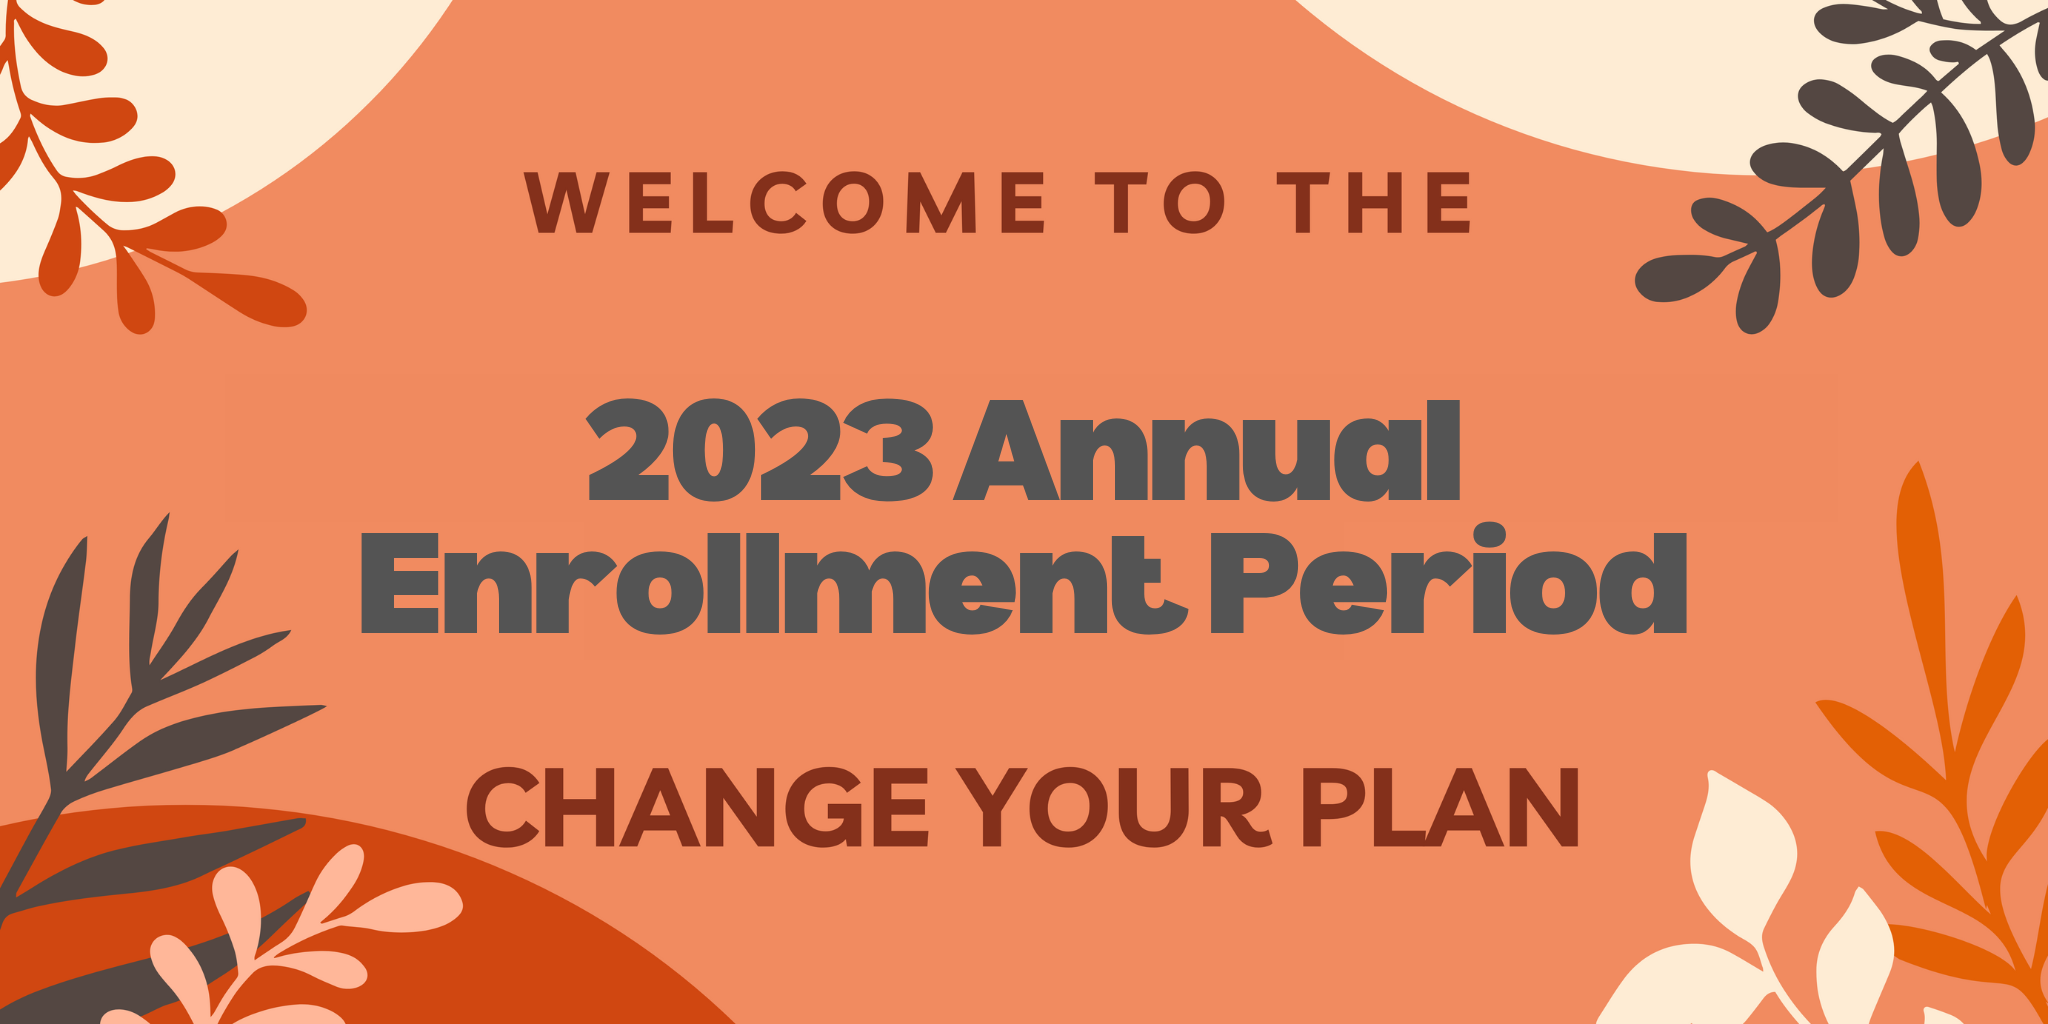 Welcome to the 2023 Annual Enrollment Period Change your plan stock image